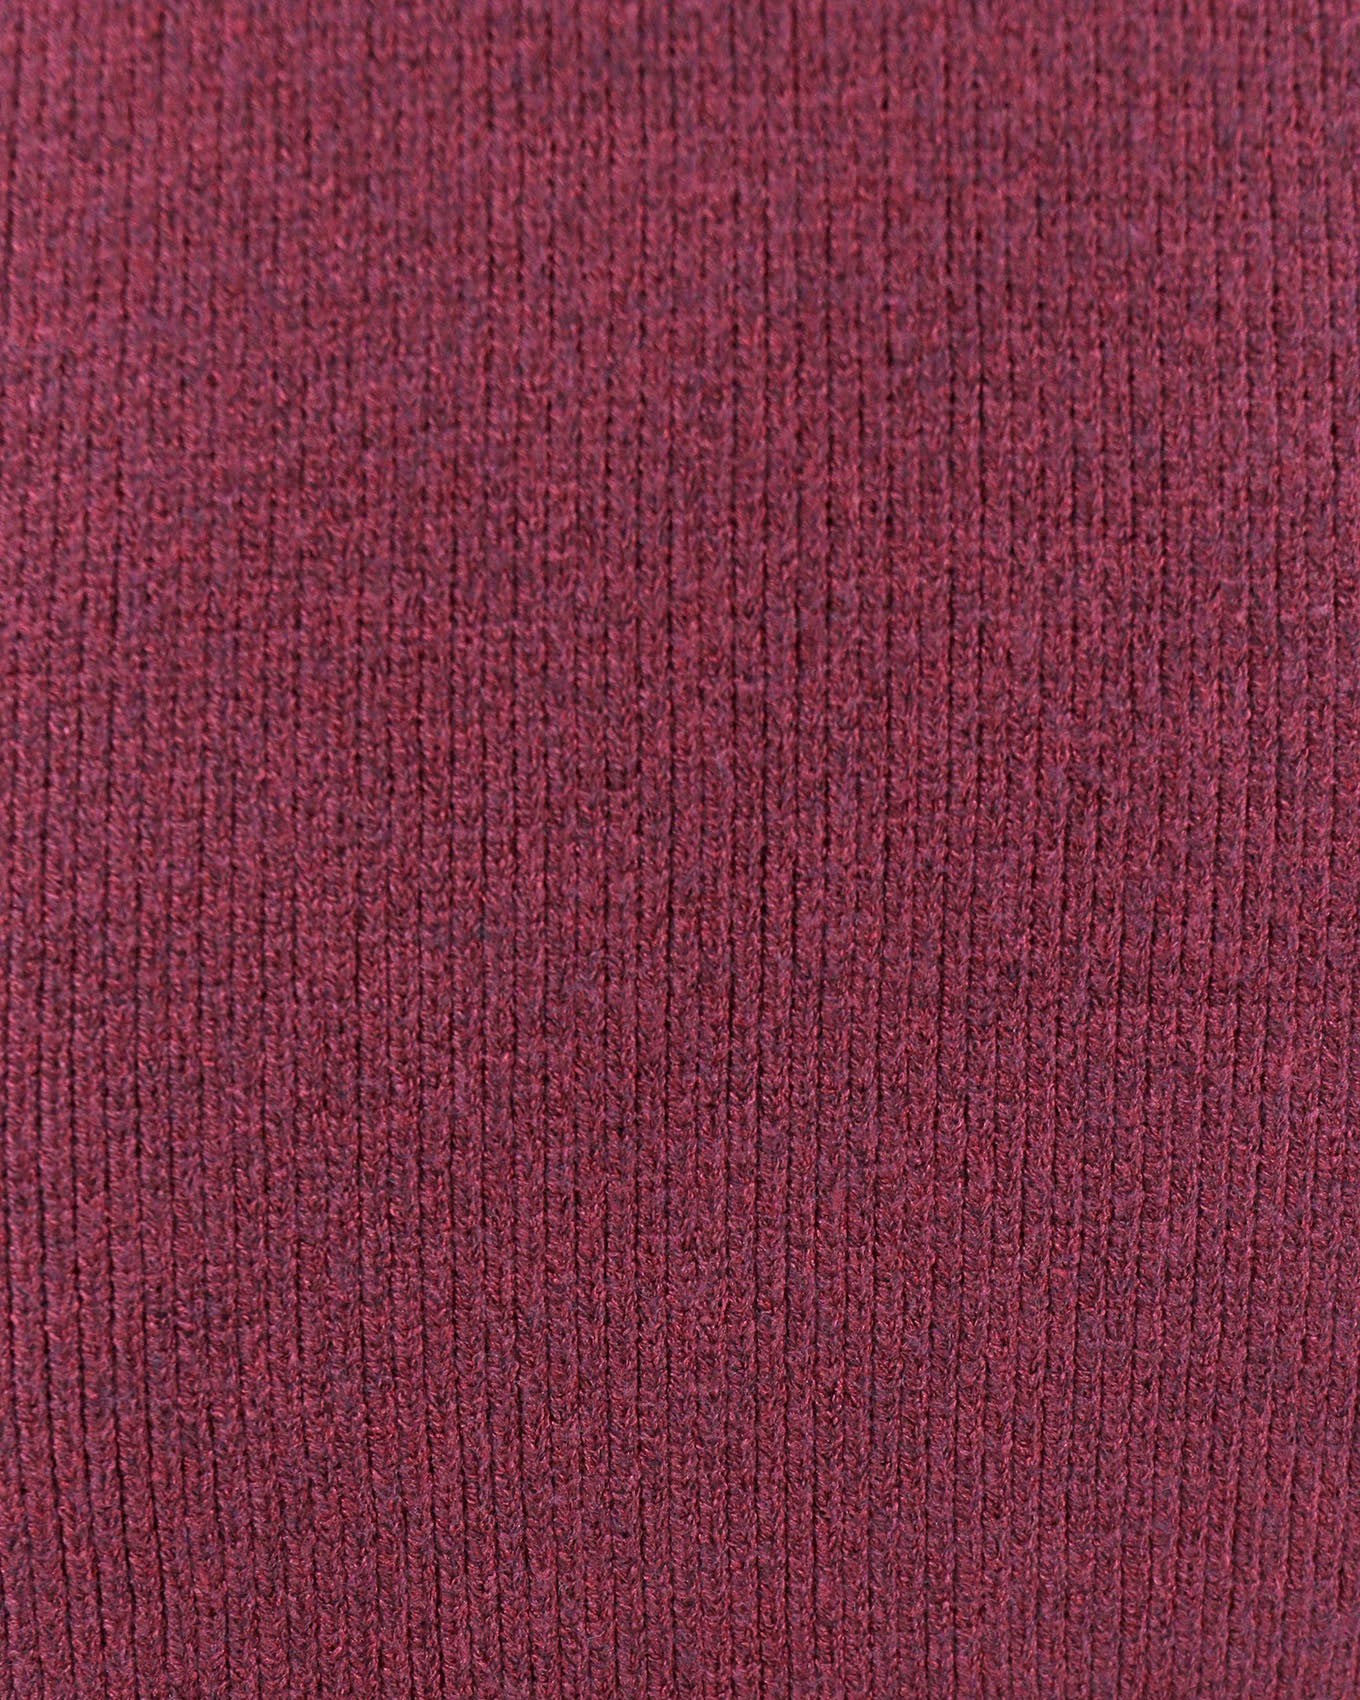 Fabric view of Cabernet Faux Wrap Sweater Dress